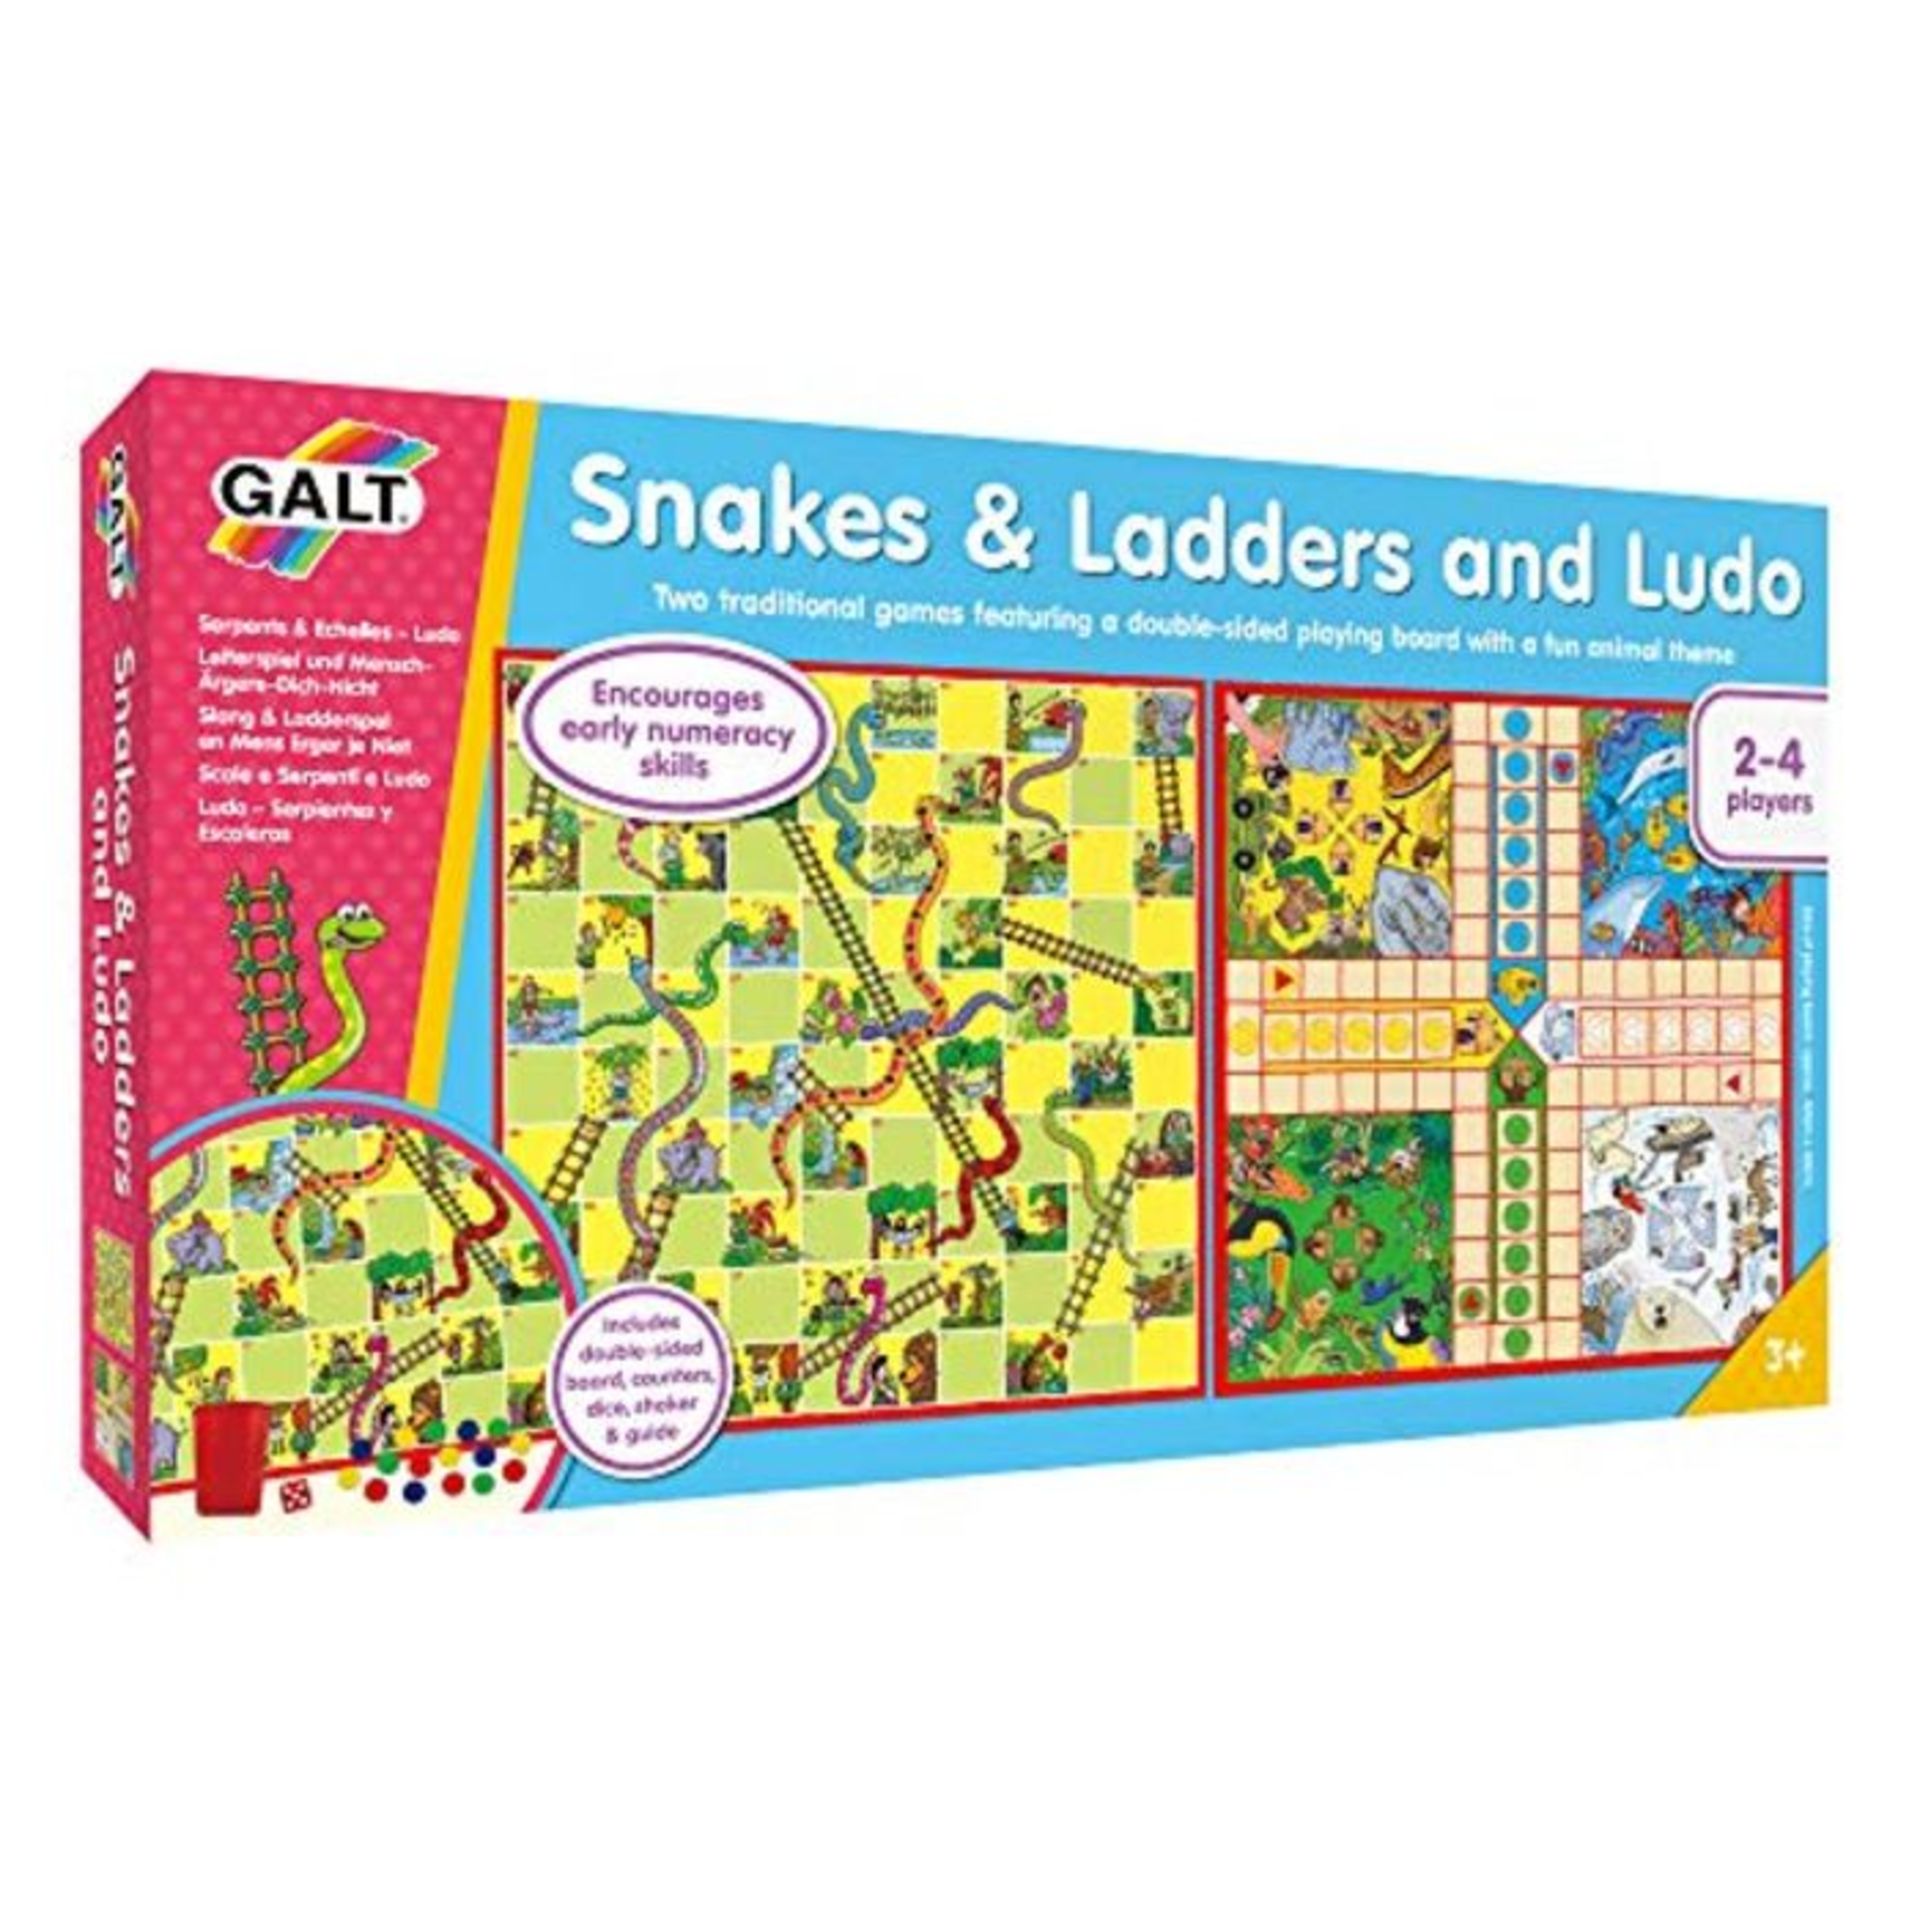 Galt Toys, Snakes & Ladders and Ludo, Classic Board Game, Ages 3 Years Plus, 2-4 Playe